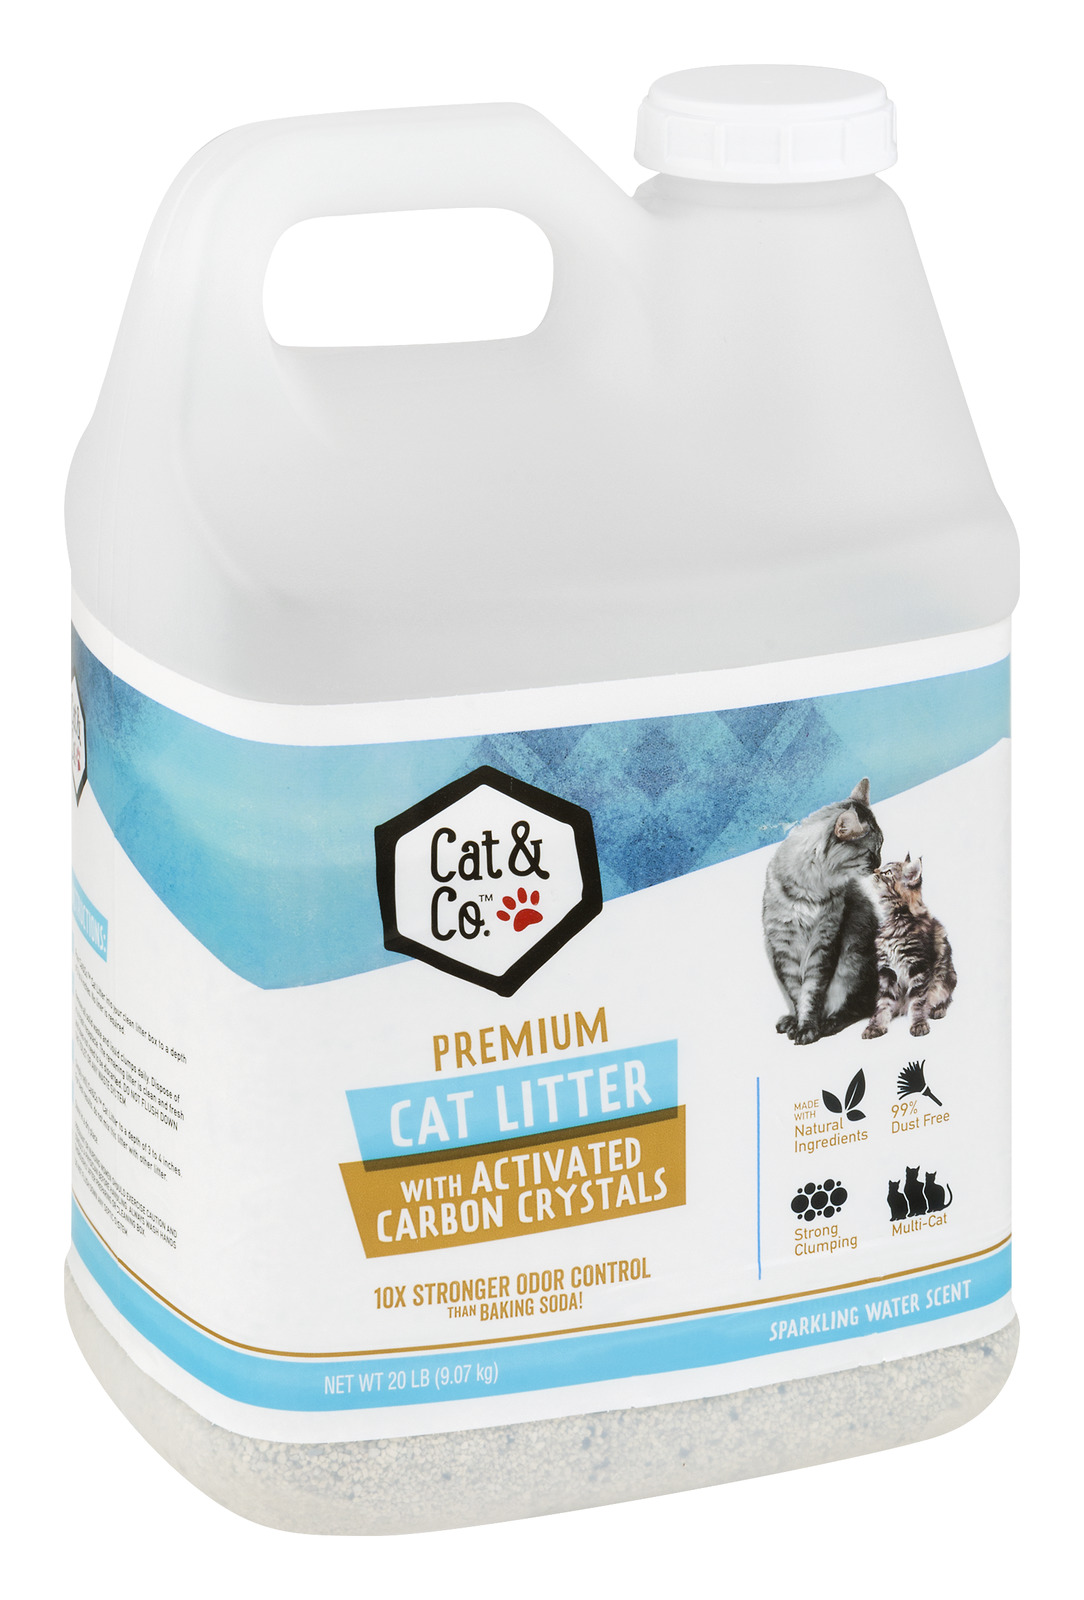 Cat & Co. 20lb. MultiCat Litter with Activated Carbon Crystals